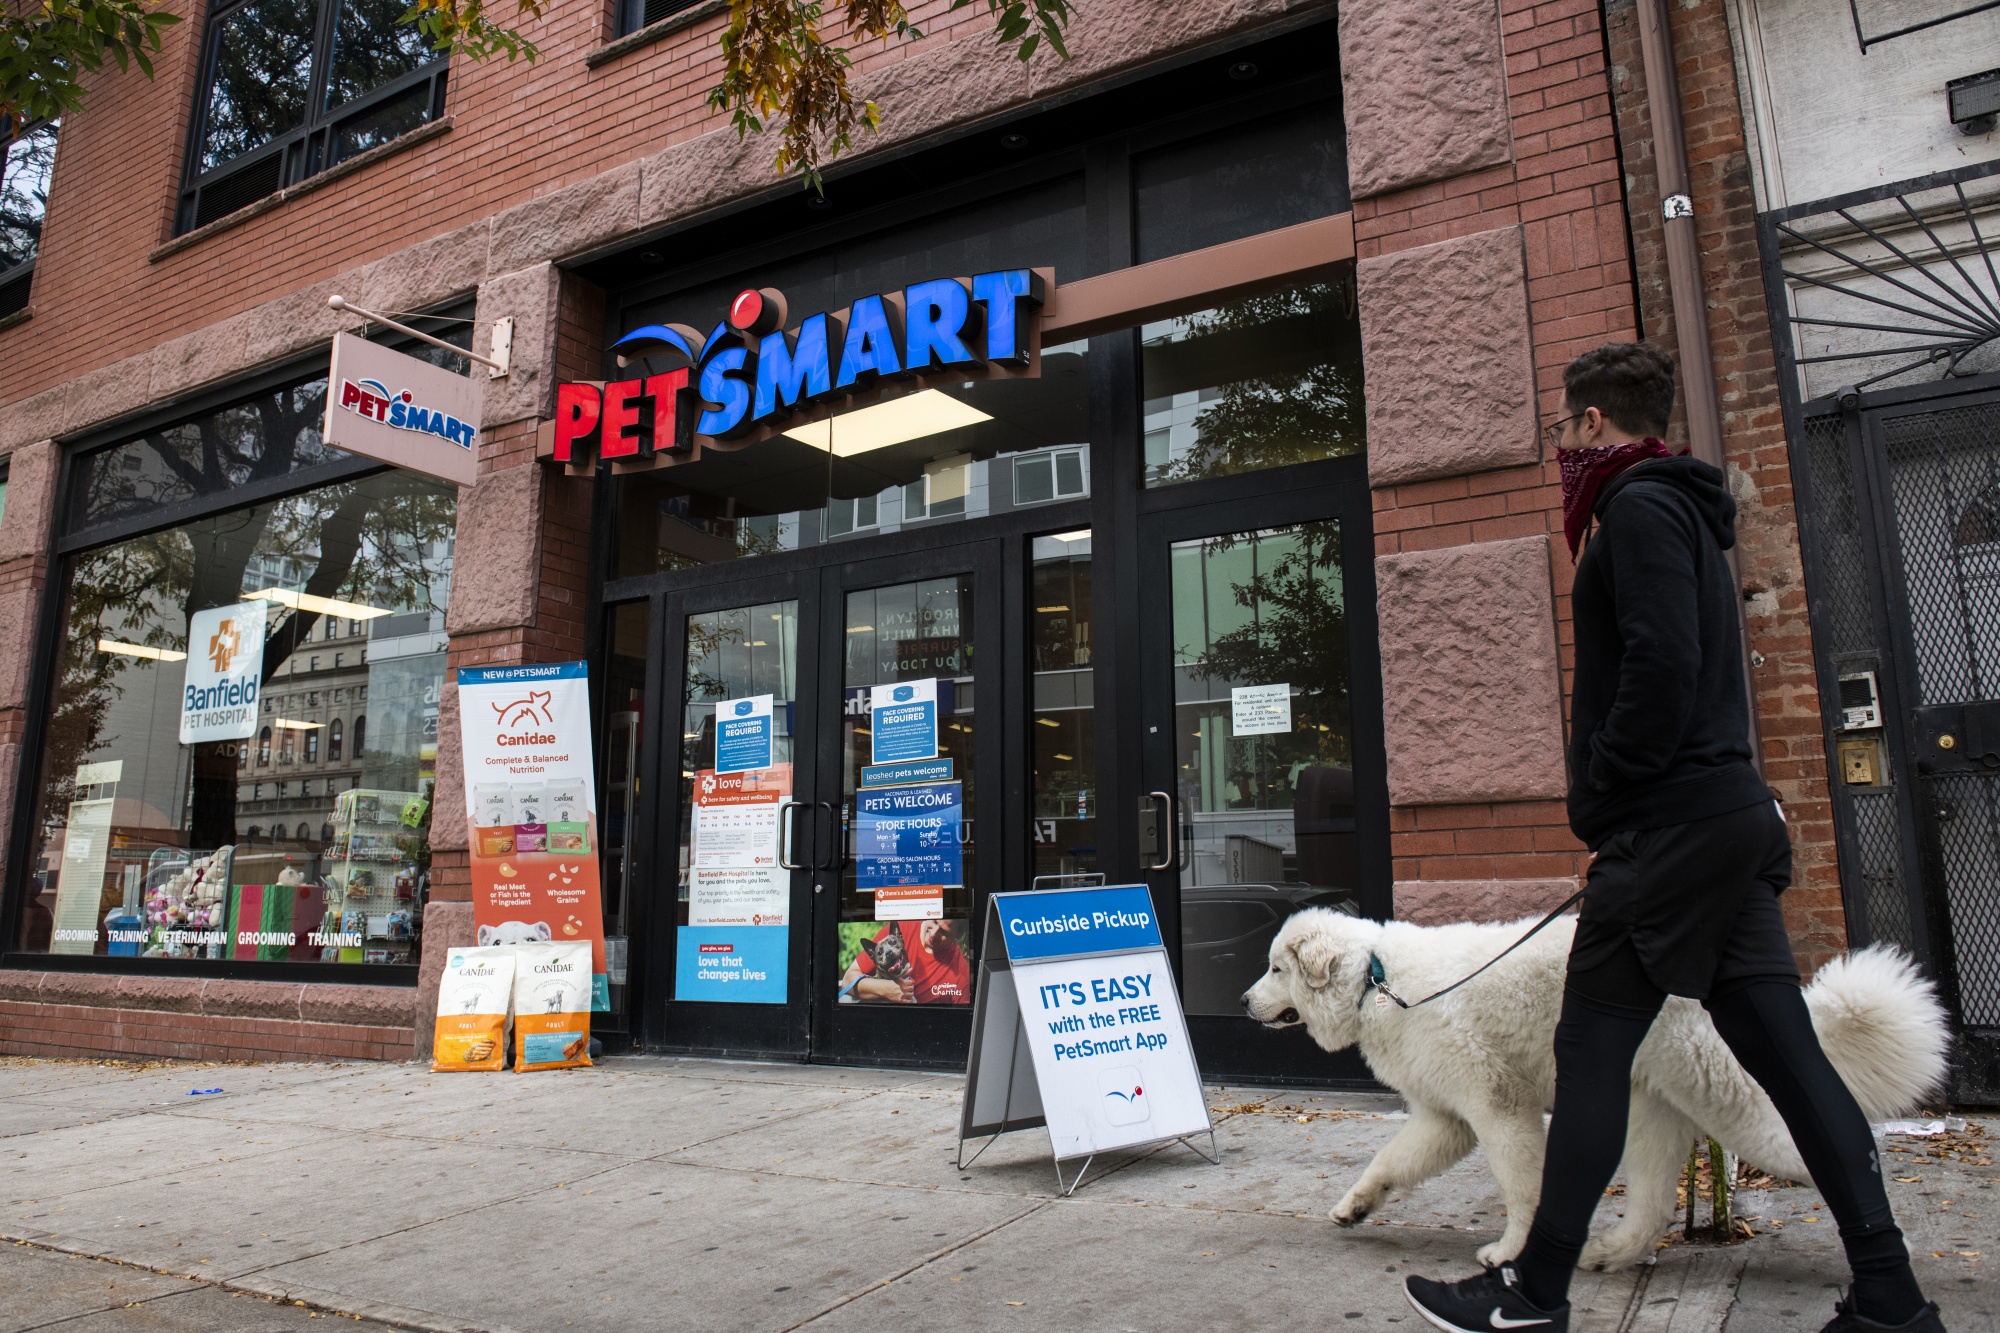 KKR SPAC Said to Mull Deal for PetSmart at $14 Billion Value - Bloomberg